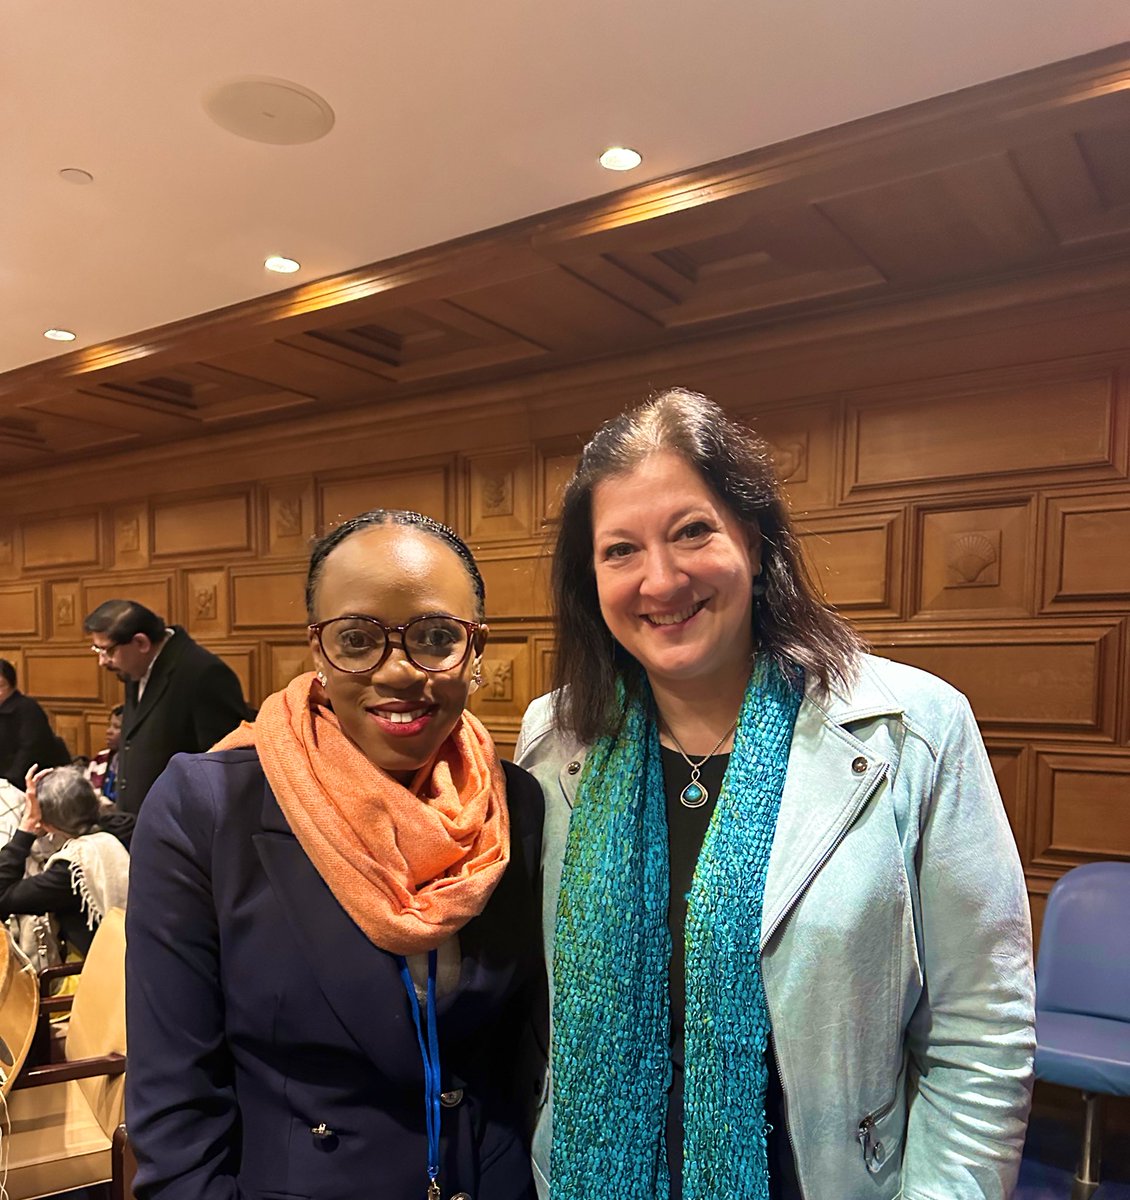 Leadership is about making others better as a result of your presence & the impact that lasts in your absence. A pleasure meeting @elyassir_alia the Regional Director @unwomenasia Always inspired by her work especially in protecting rights of migrant women in Asia.